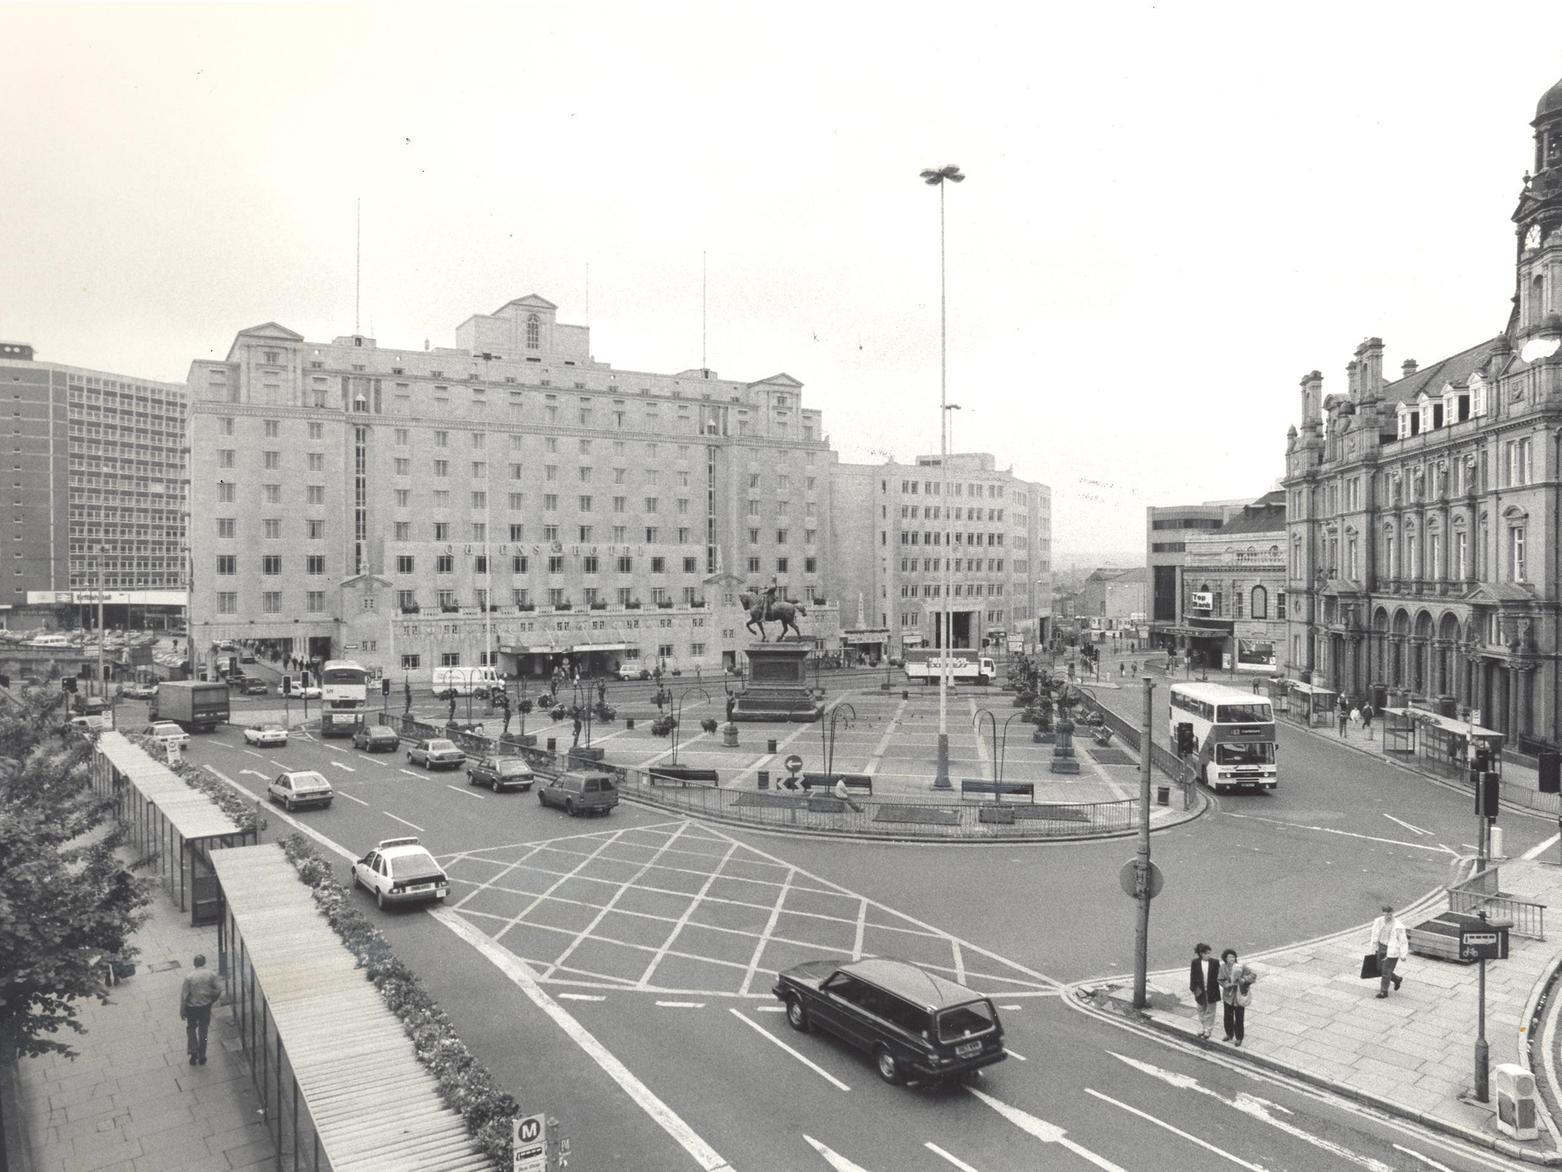 A terrific view of City Square on a spring morning - 11.10am - at the end of the 1980s.